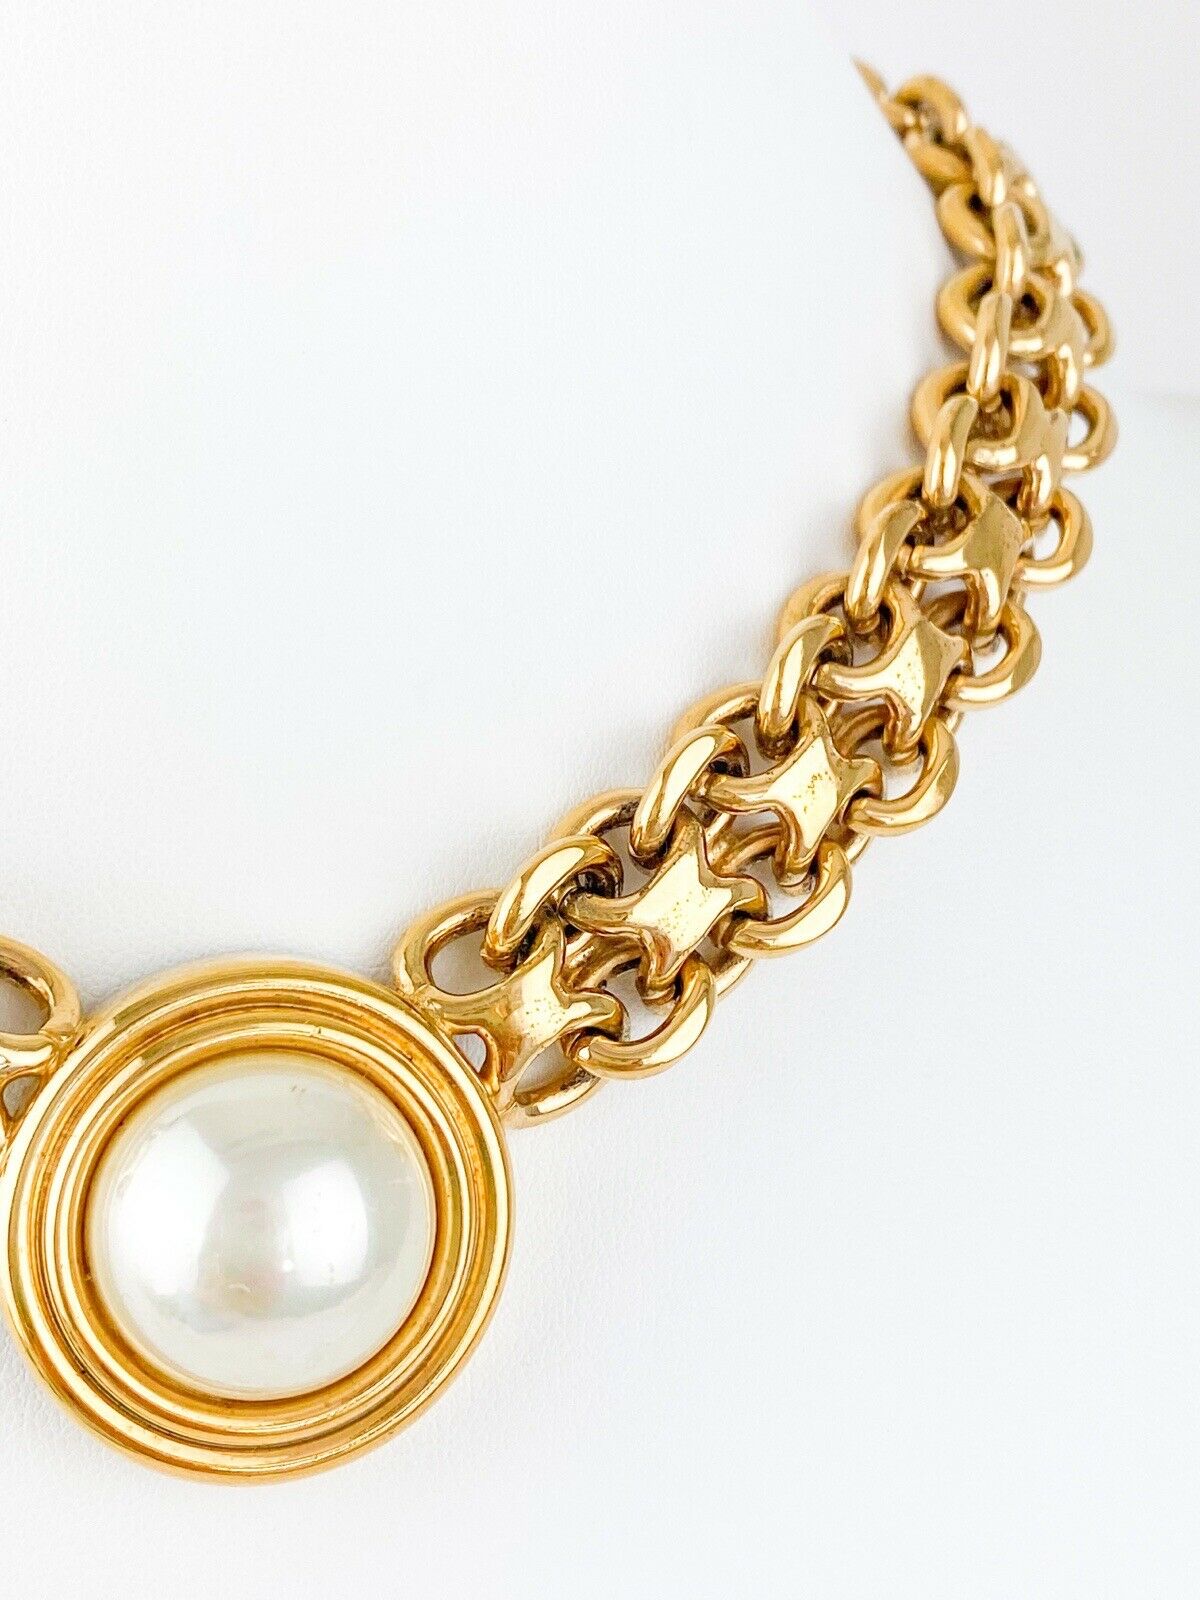 【SOLD OUT】LANVIN Germany Gold Tone Gorgeous Choker Necklace Faux Pearl Vintage